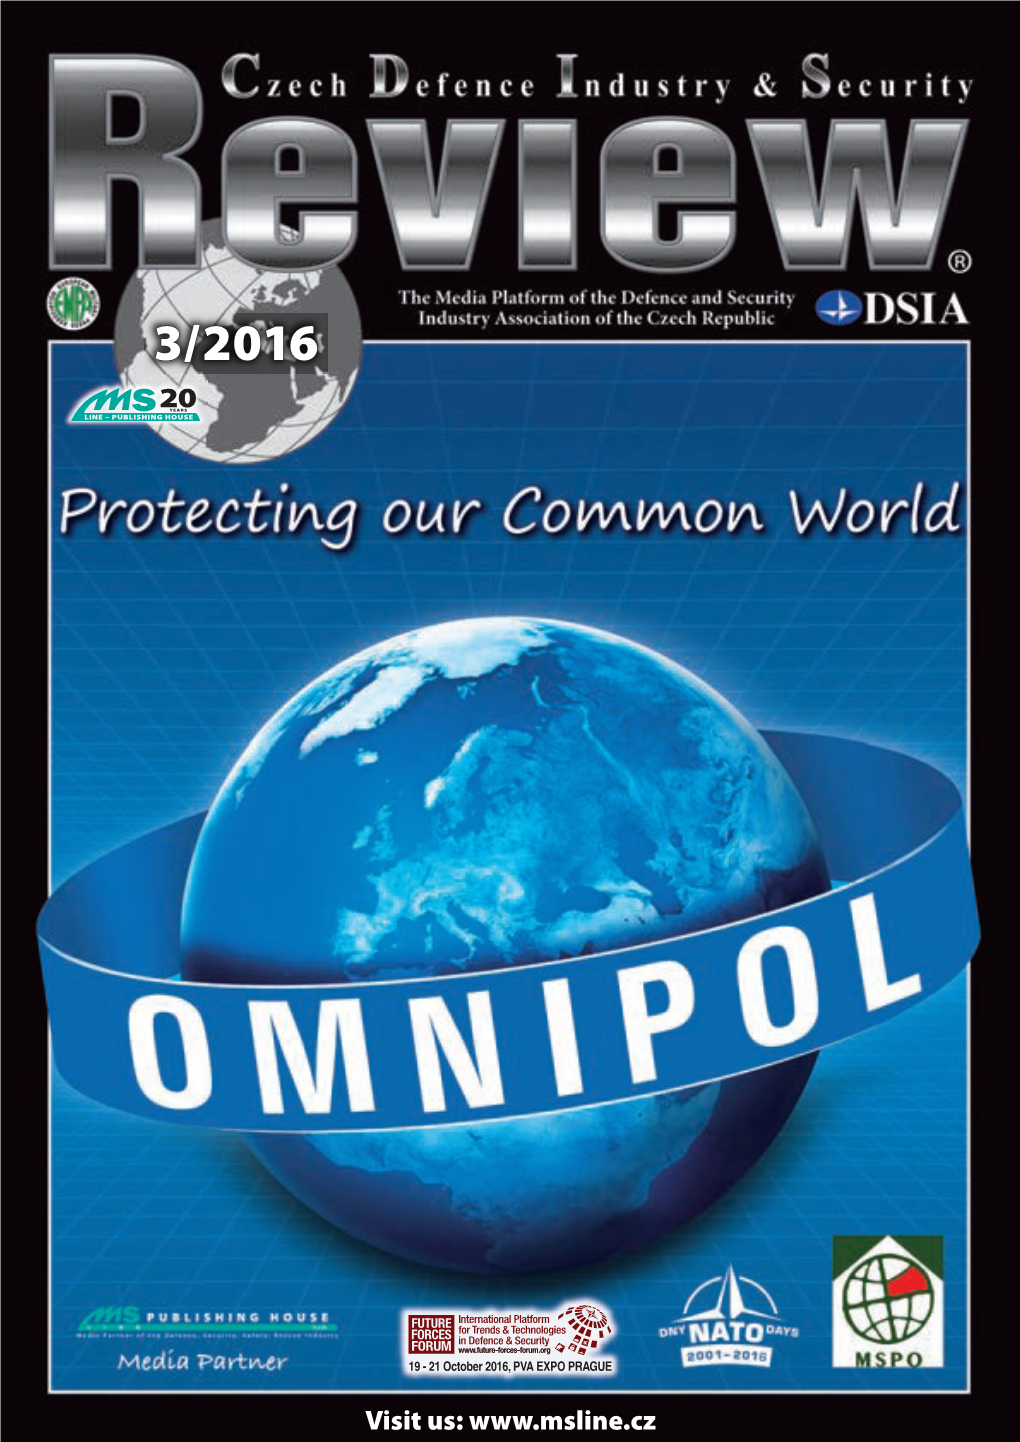 OMNIPOL – Partner with Tradition and Experience 16 ➤ Exclusive Official Welcome to FFF ERA Introduces the Novelty in Its Portfolio: ERIS C2 – Integrated Air Command